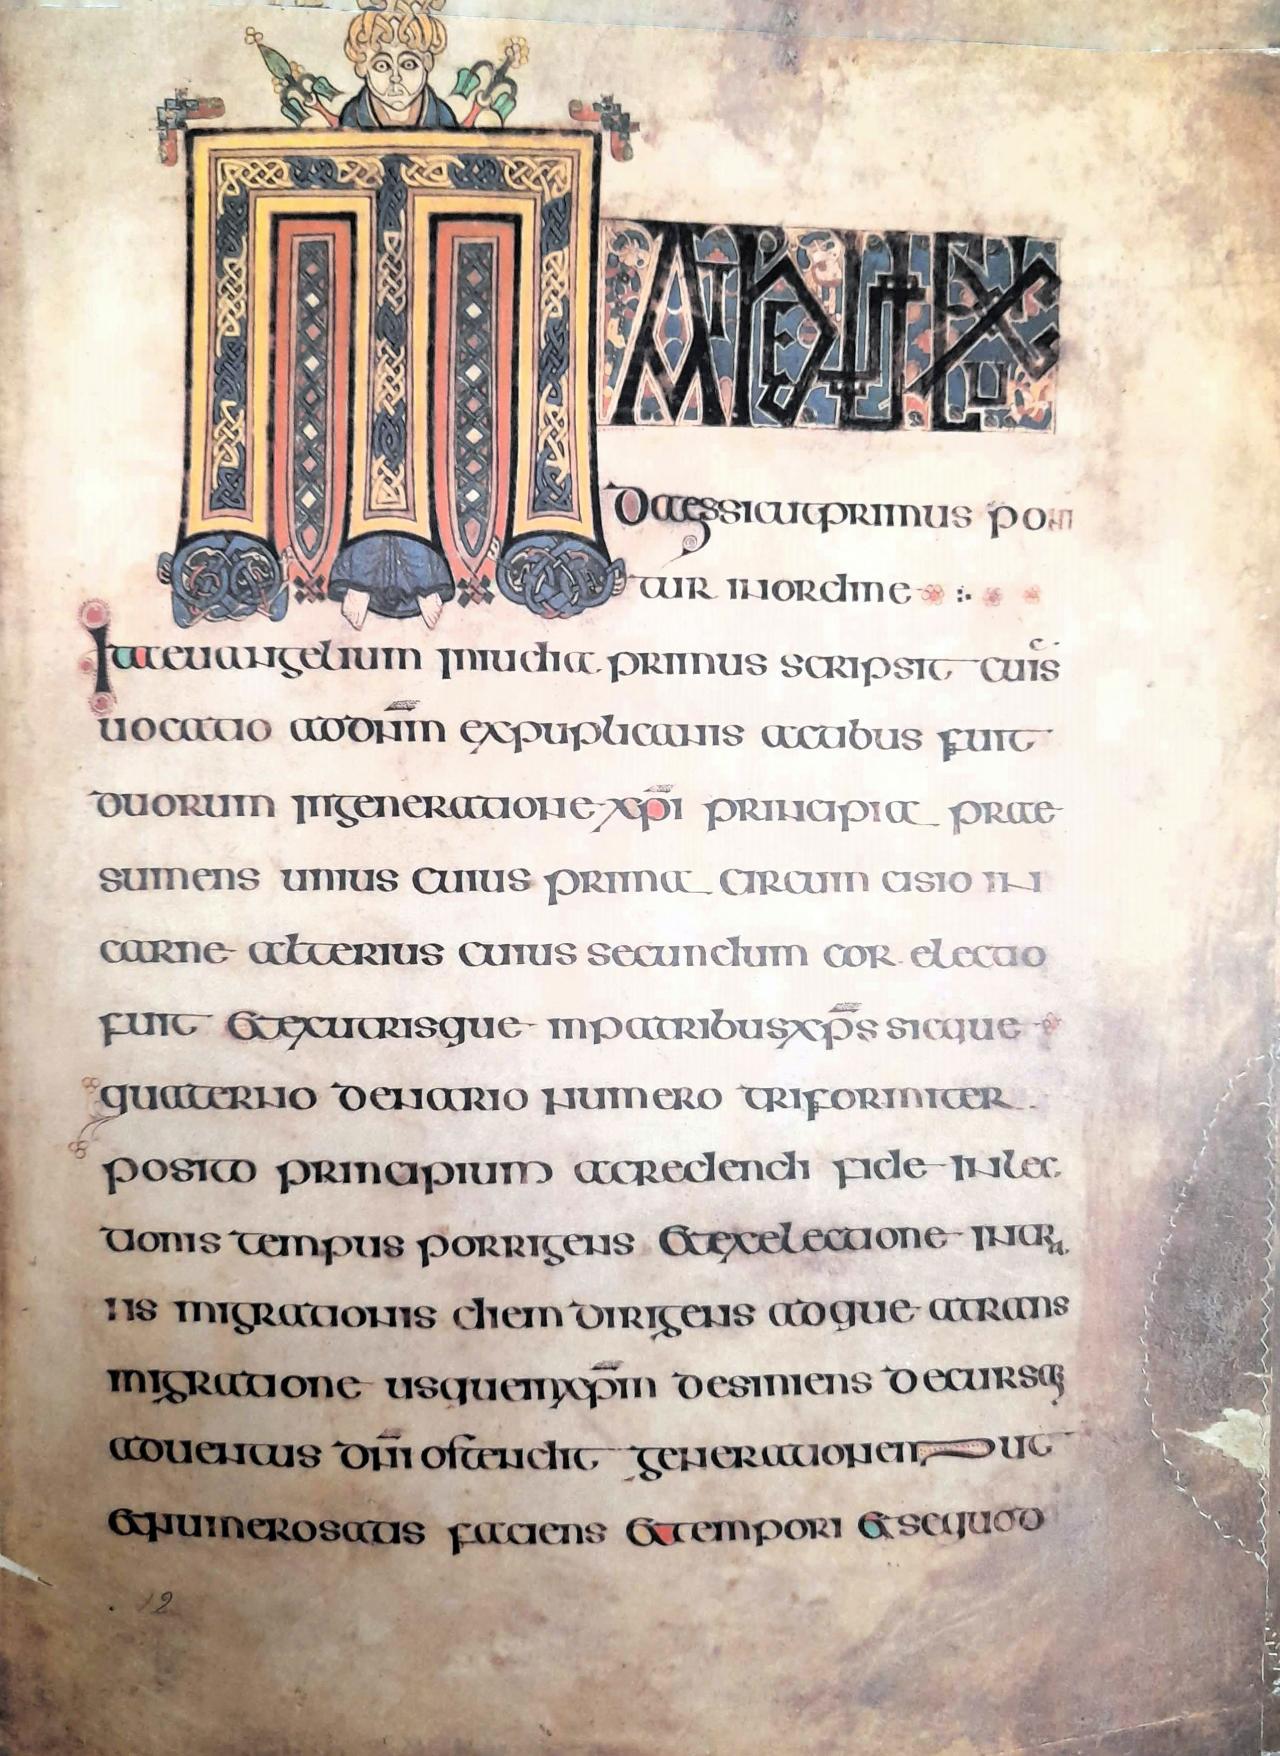 A decorative letter M from the Book of Kells.